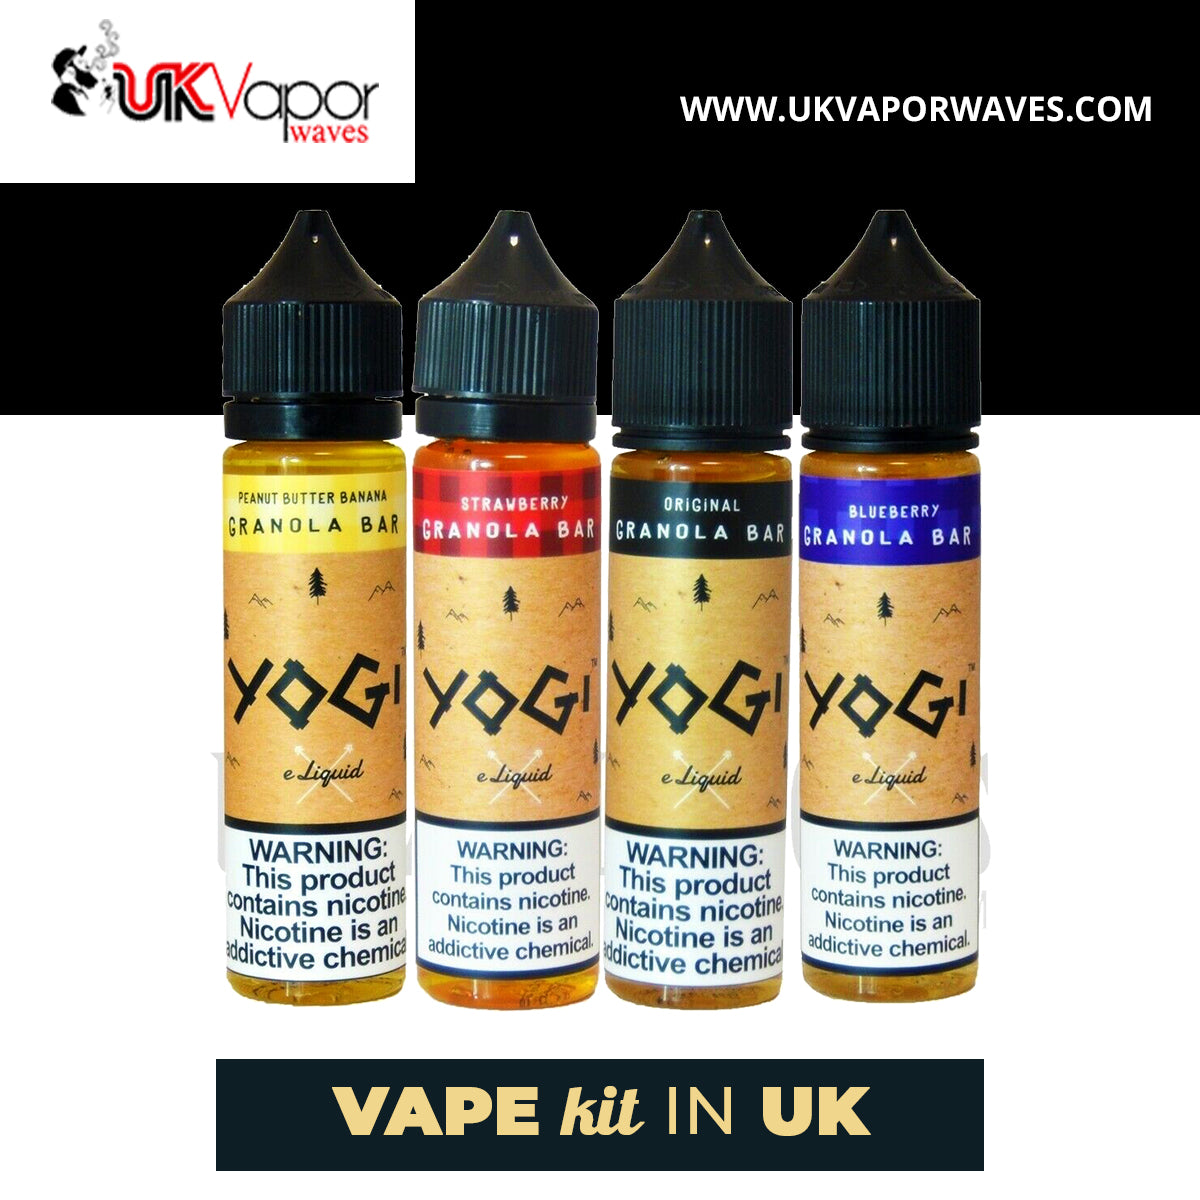 How To Find The Best Vape Kit In The UK